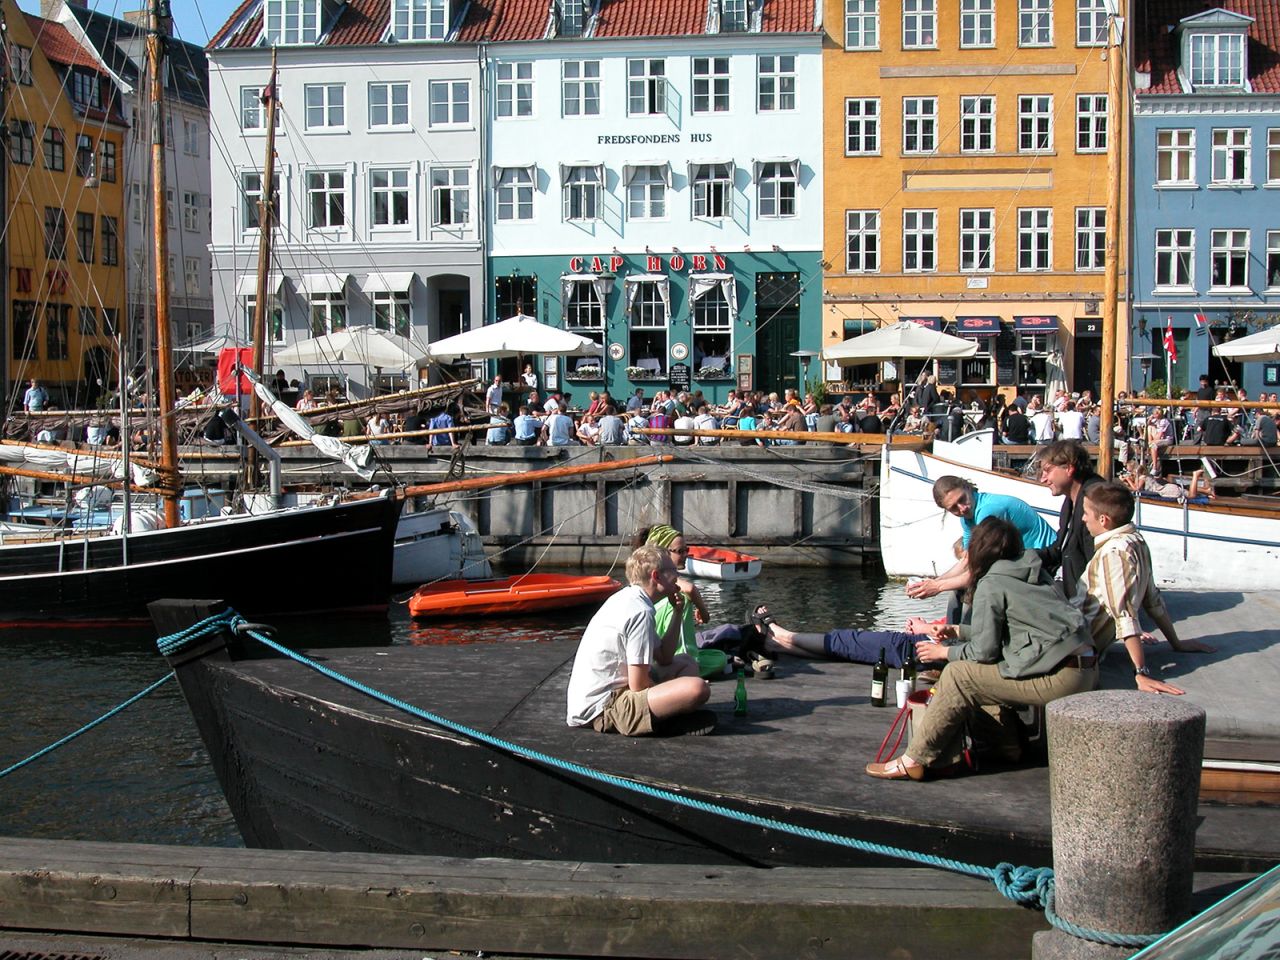 In Copenhagen, you’ll see crowds of young people along the city’s canals enjoying beer from the grocery store. Why not do the same?